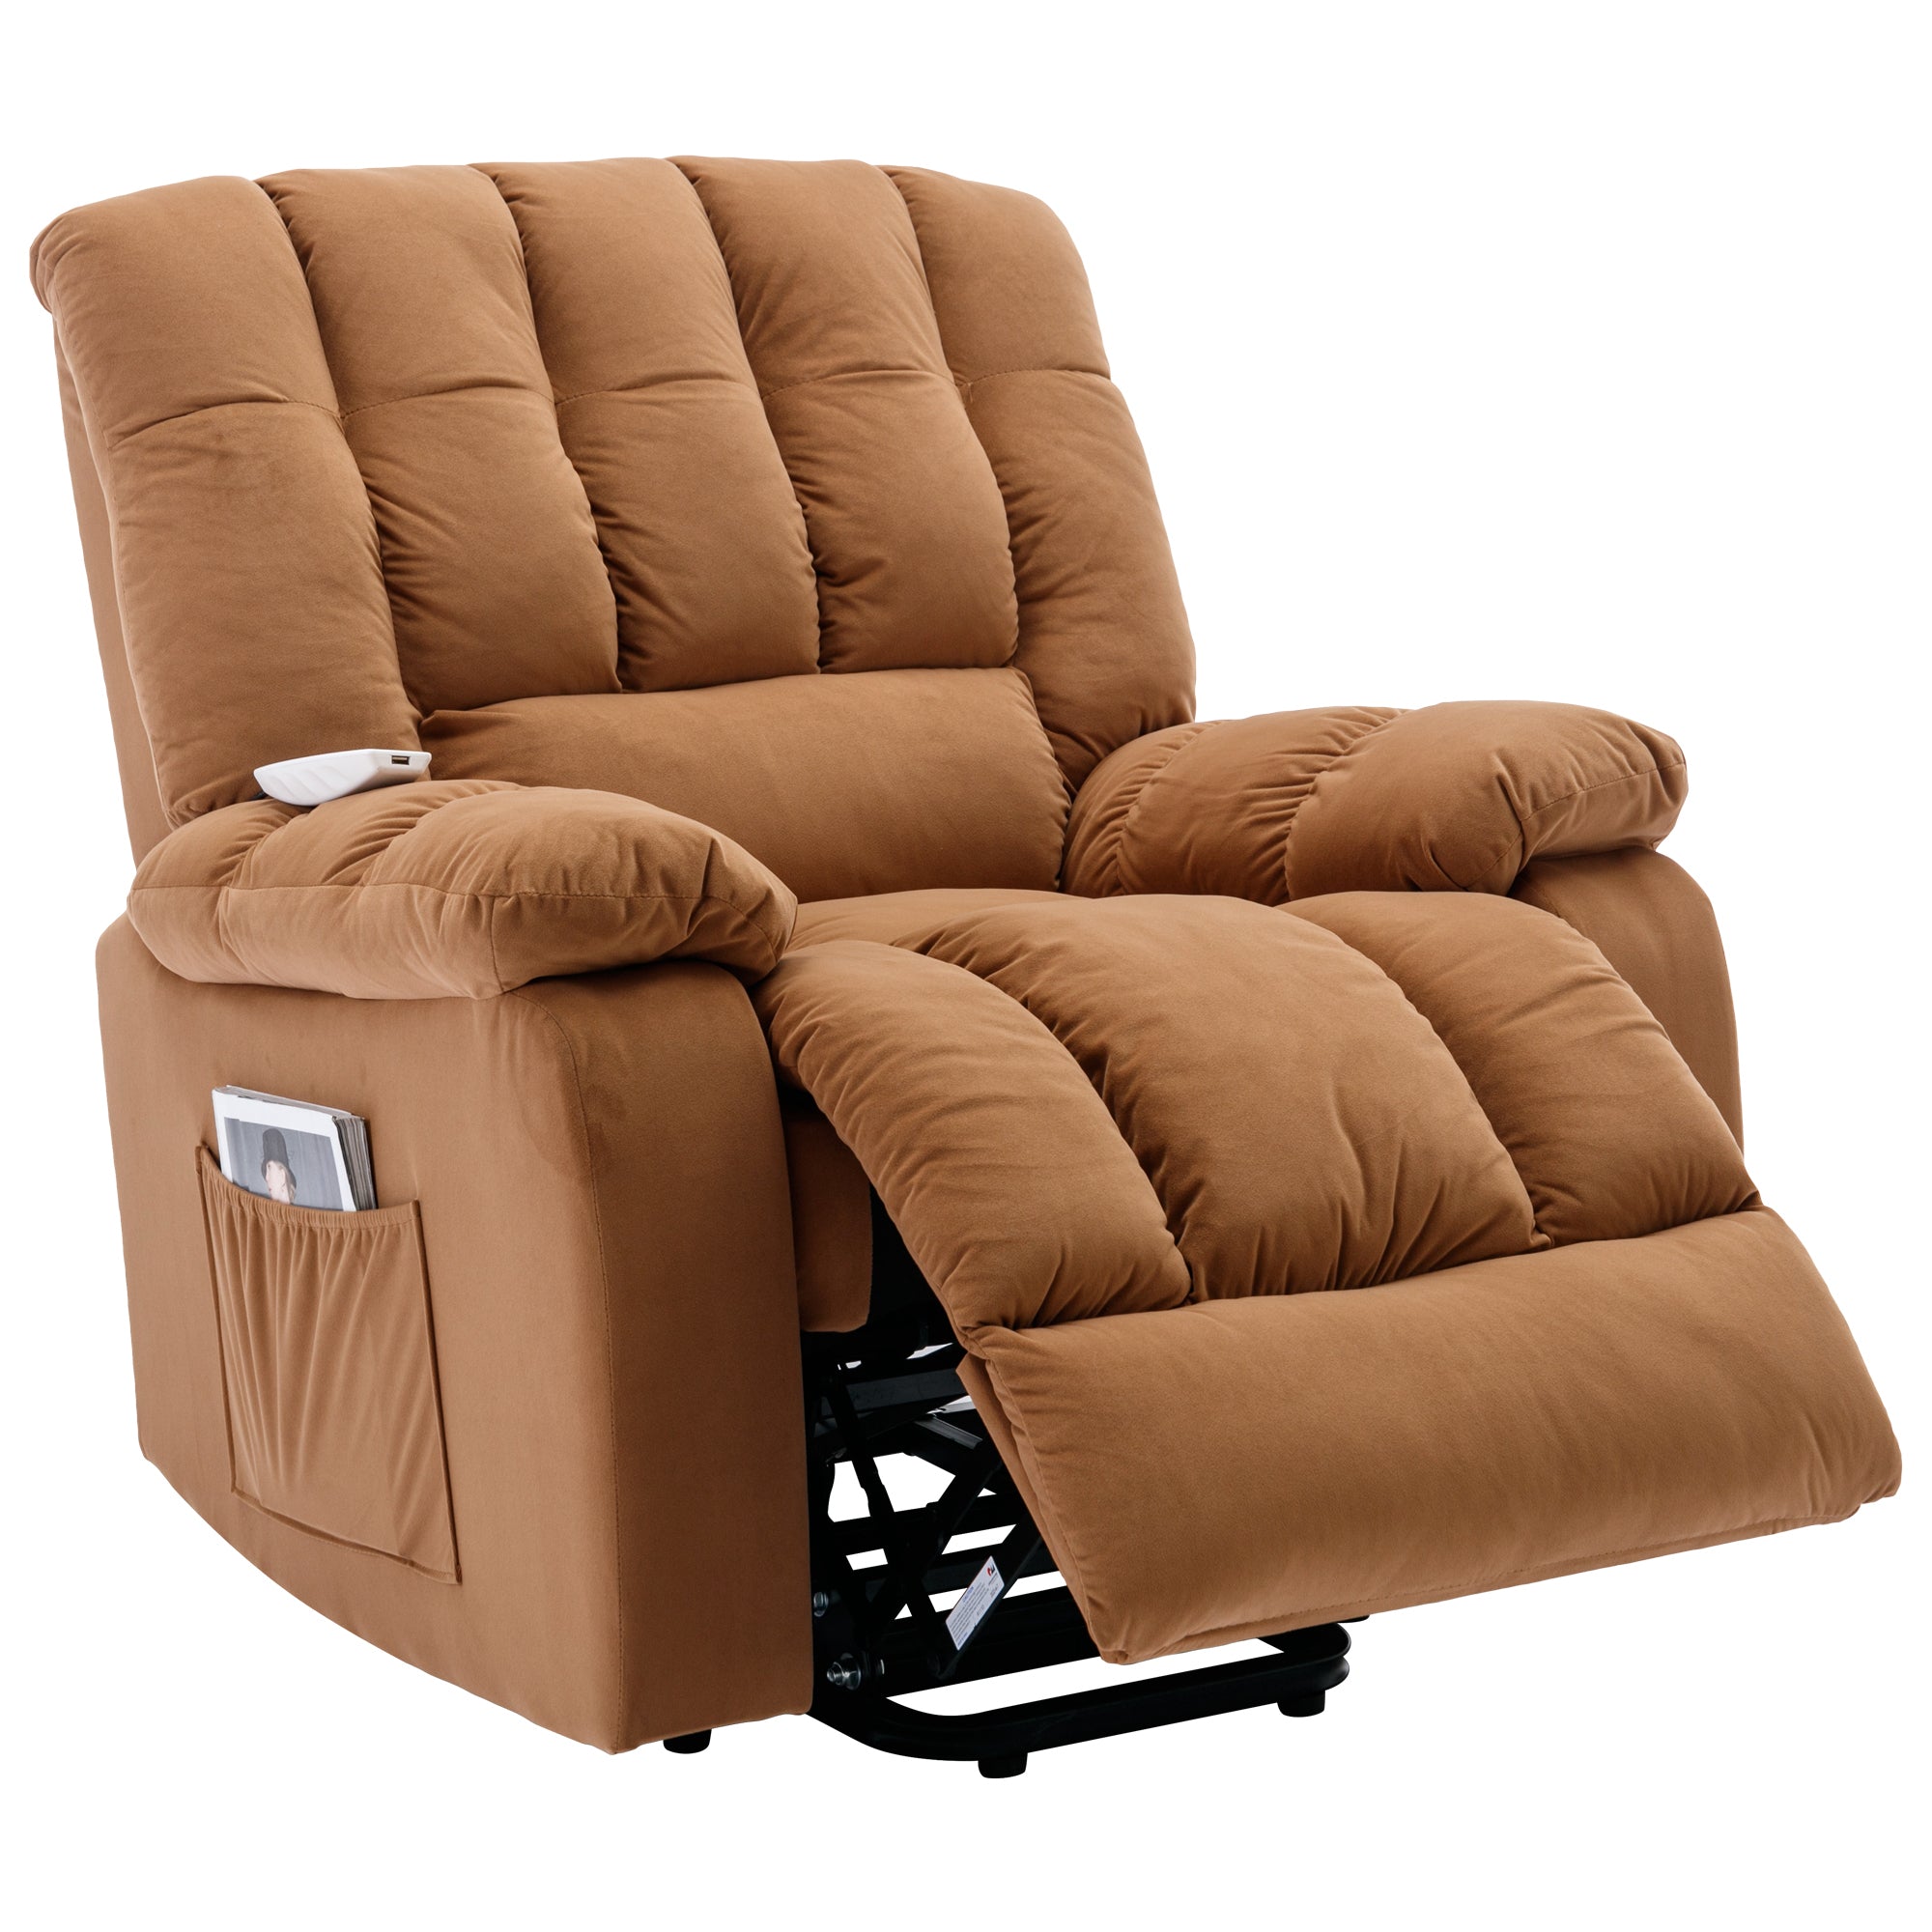 Light Brown Power Lift Chair Front Profile Quarter Shot Foot Rest Extended